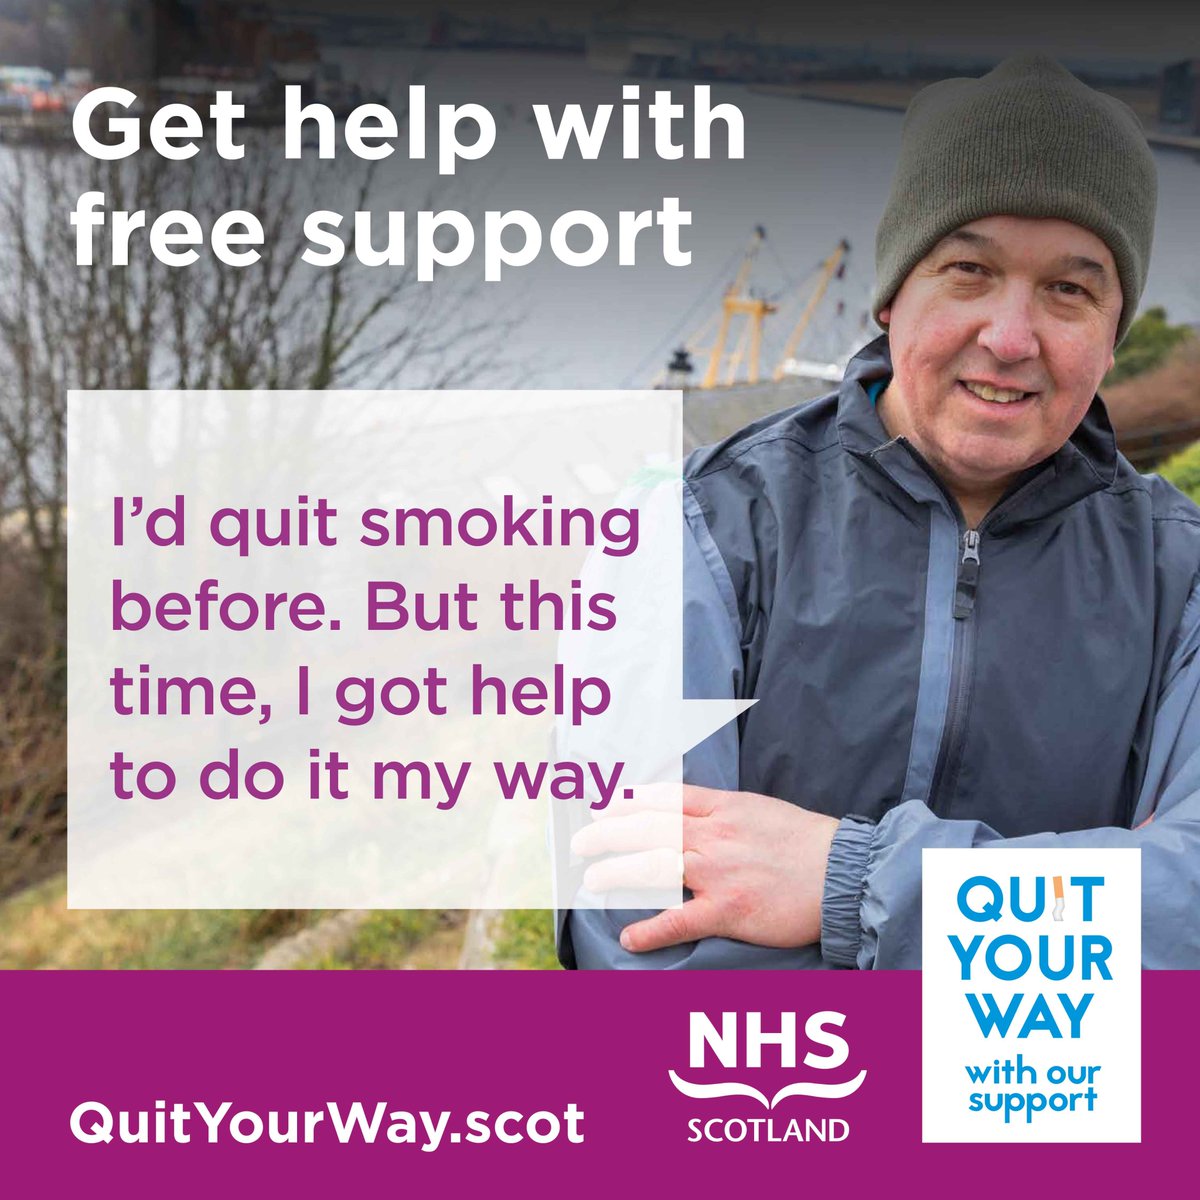 Quitting smoking isn’t easy. Often it can take a few attempts.

Get help with free support.

With #QuitYourWay you’re more likely to stop – and stay stopped.

Get started at QuitYourWay.scot